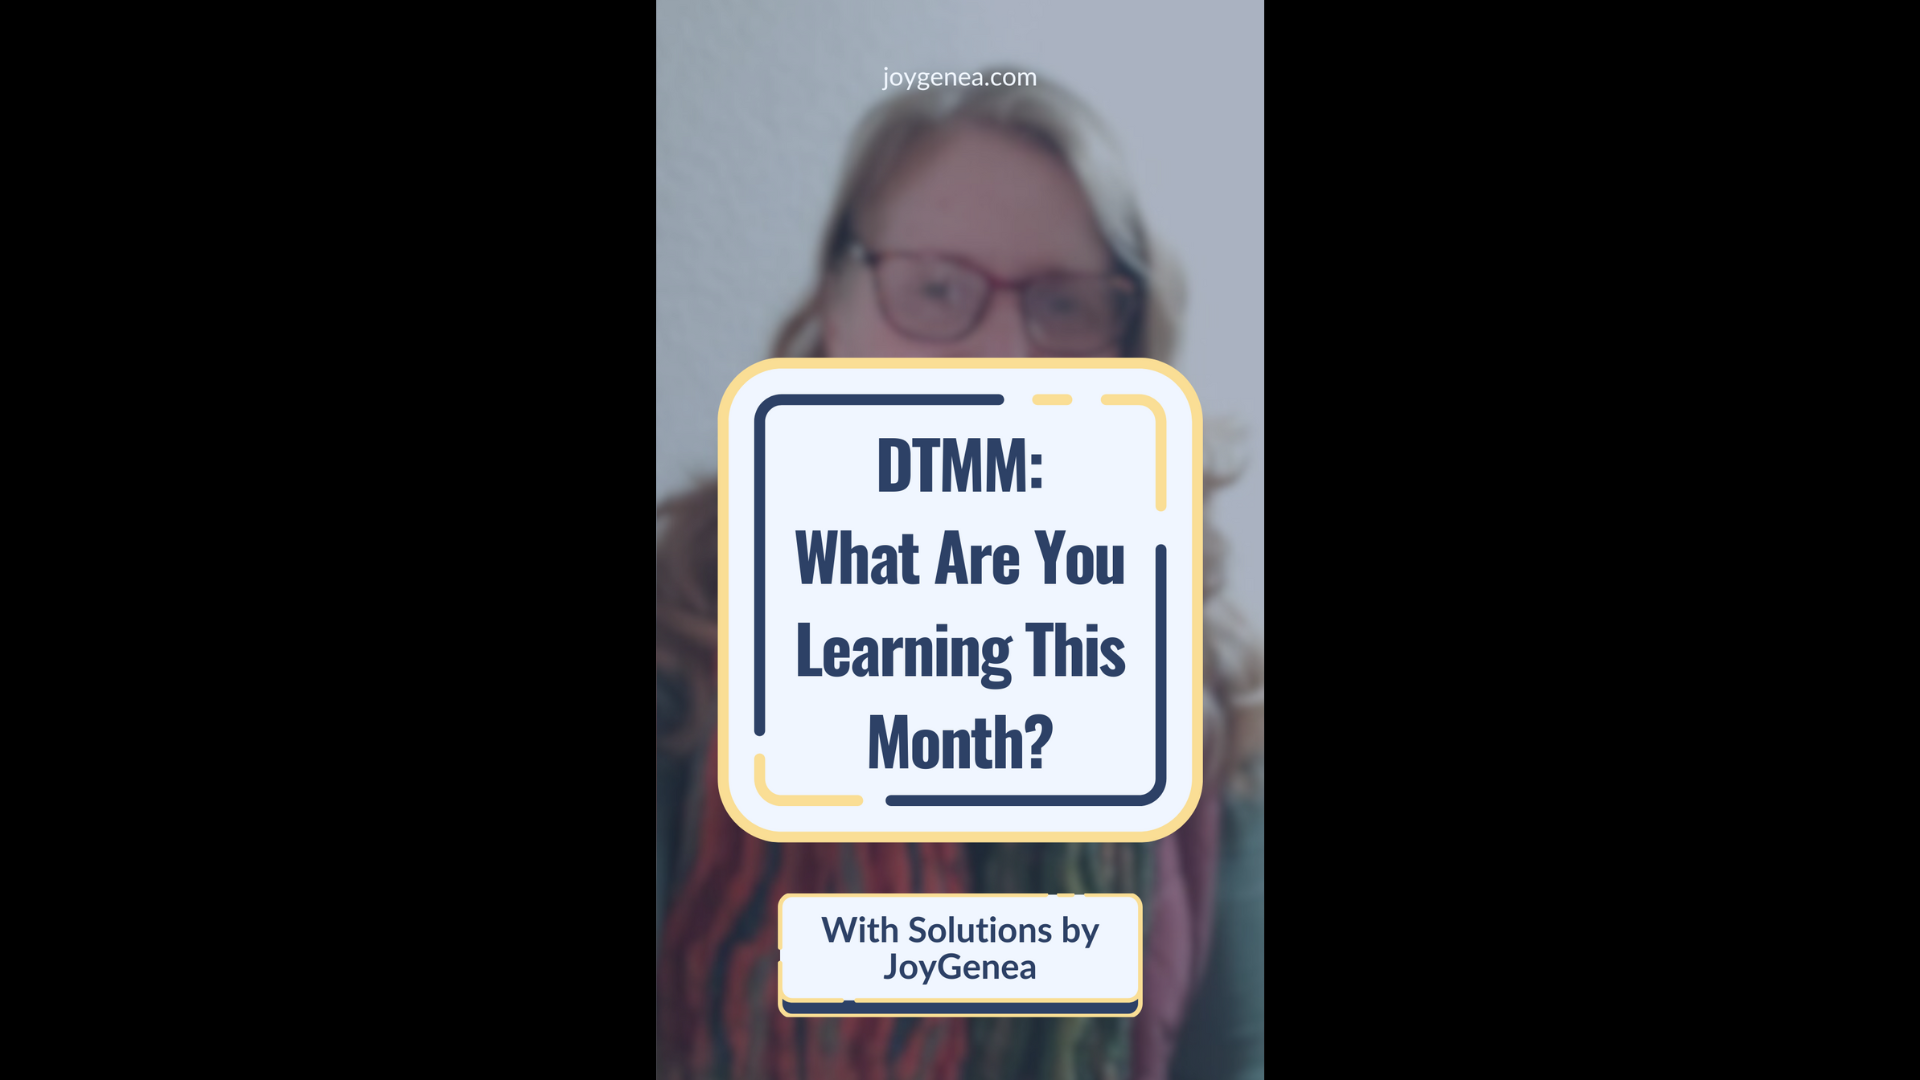 Featured image for “DTMM: What are you learning this month?”